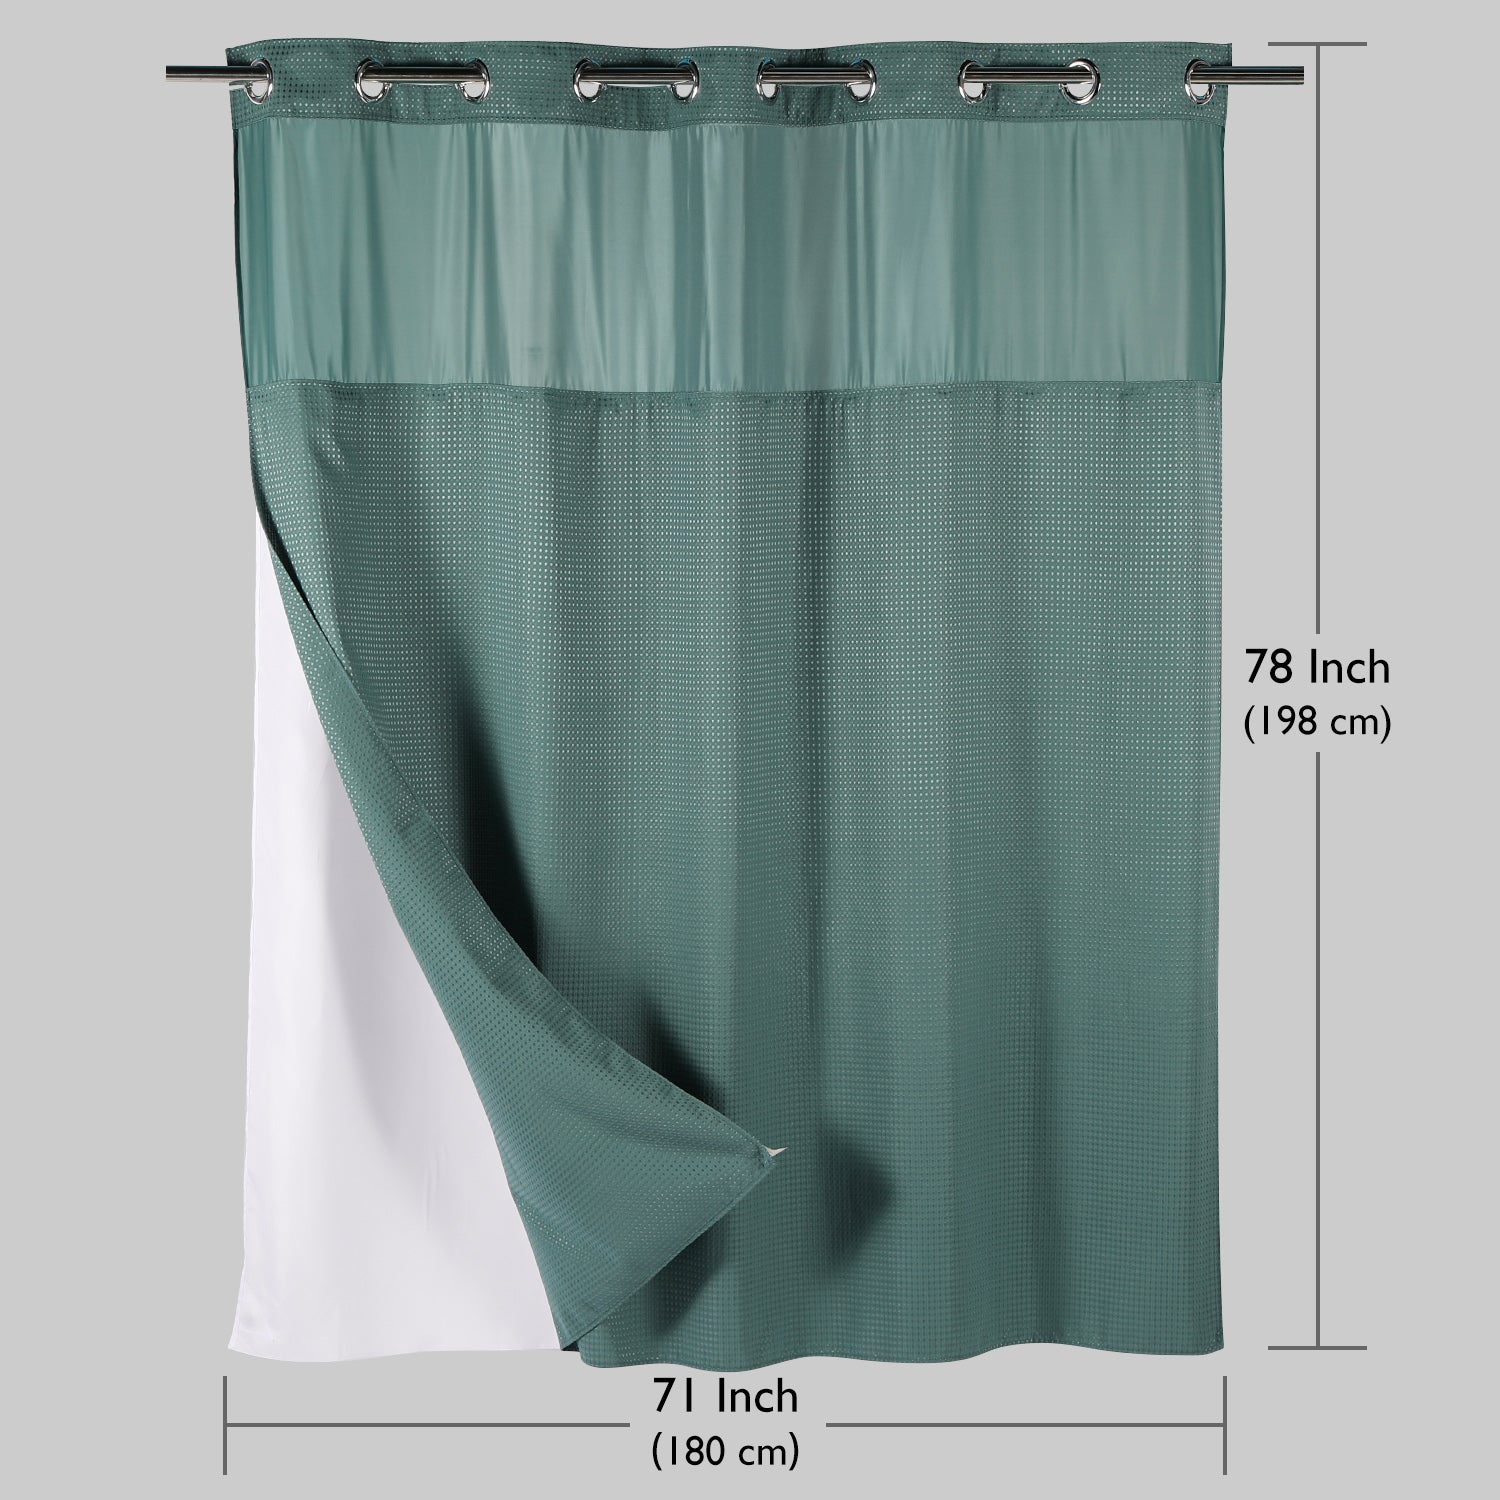 Gibelle No Hook Waffle Weave Shower Curtain with Snap-in Fabric Liner Set  for Bathroom, Hotel Style with Mesh Top Window, Waterproof & Washable, Sage  Green, 72x74 - Yahoo Shopping